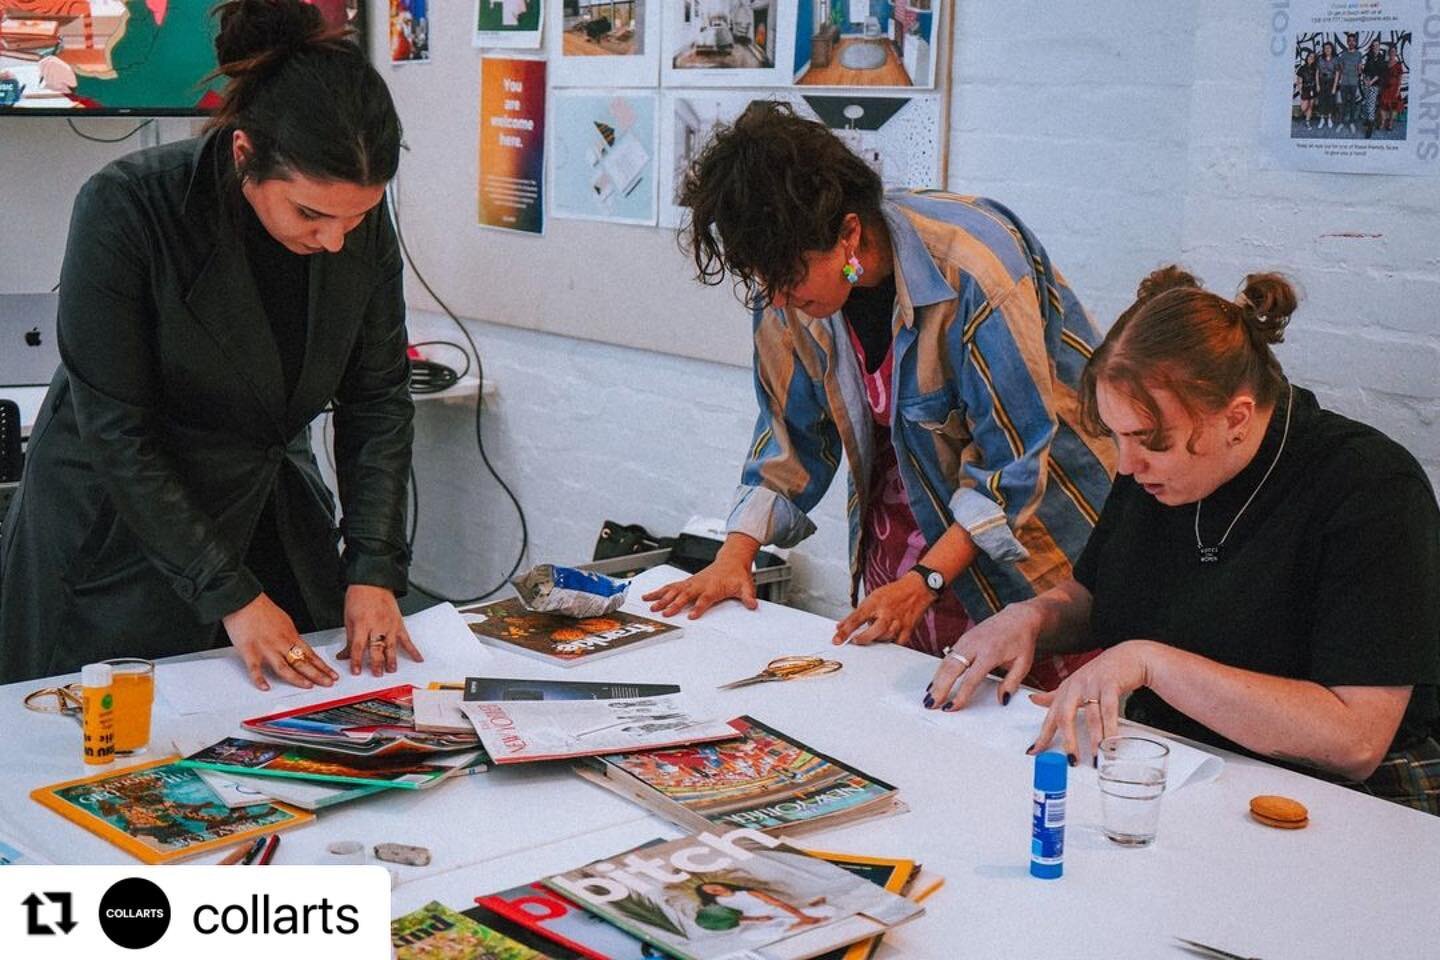 #Repost from our IWD workshop @collarts

・・・
What better way to encourage creative expression on #InternationalWomensDay than with a zine and collage workshop by the hosts of the @beingbiracialpodcast?

Last week, Kate Robinson and Maria Birch-Morung